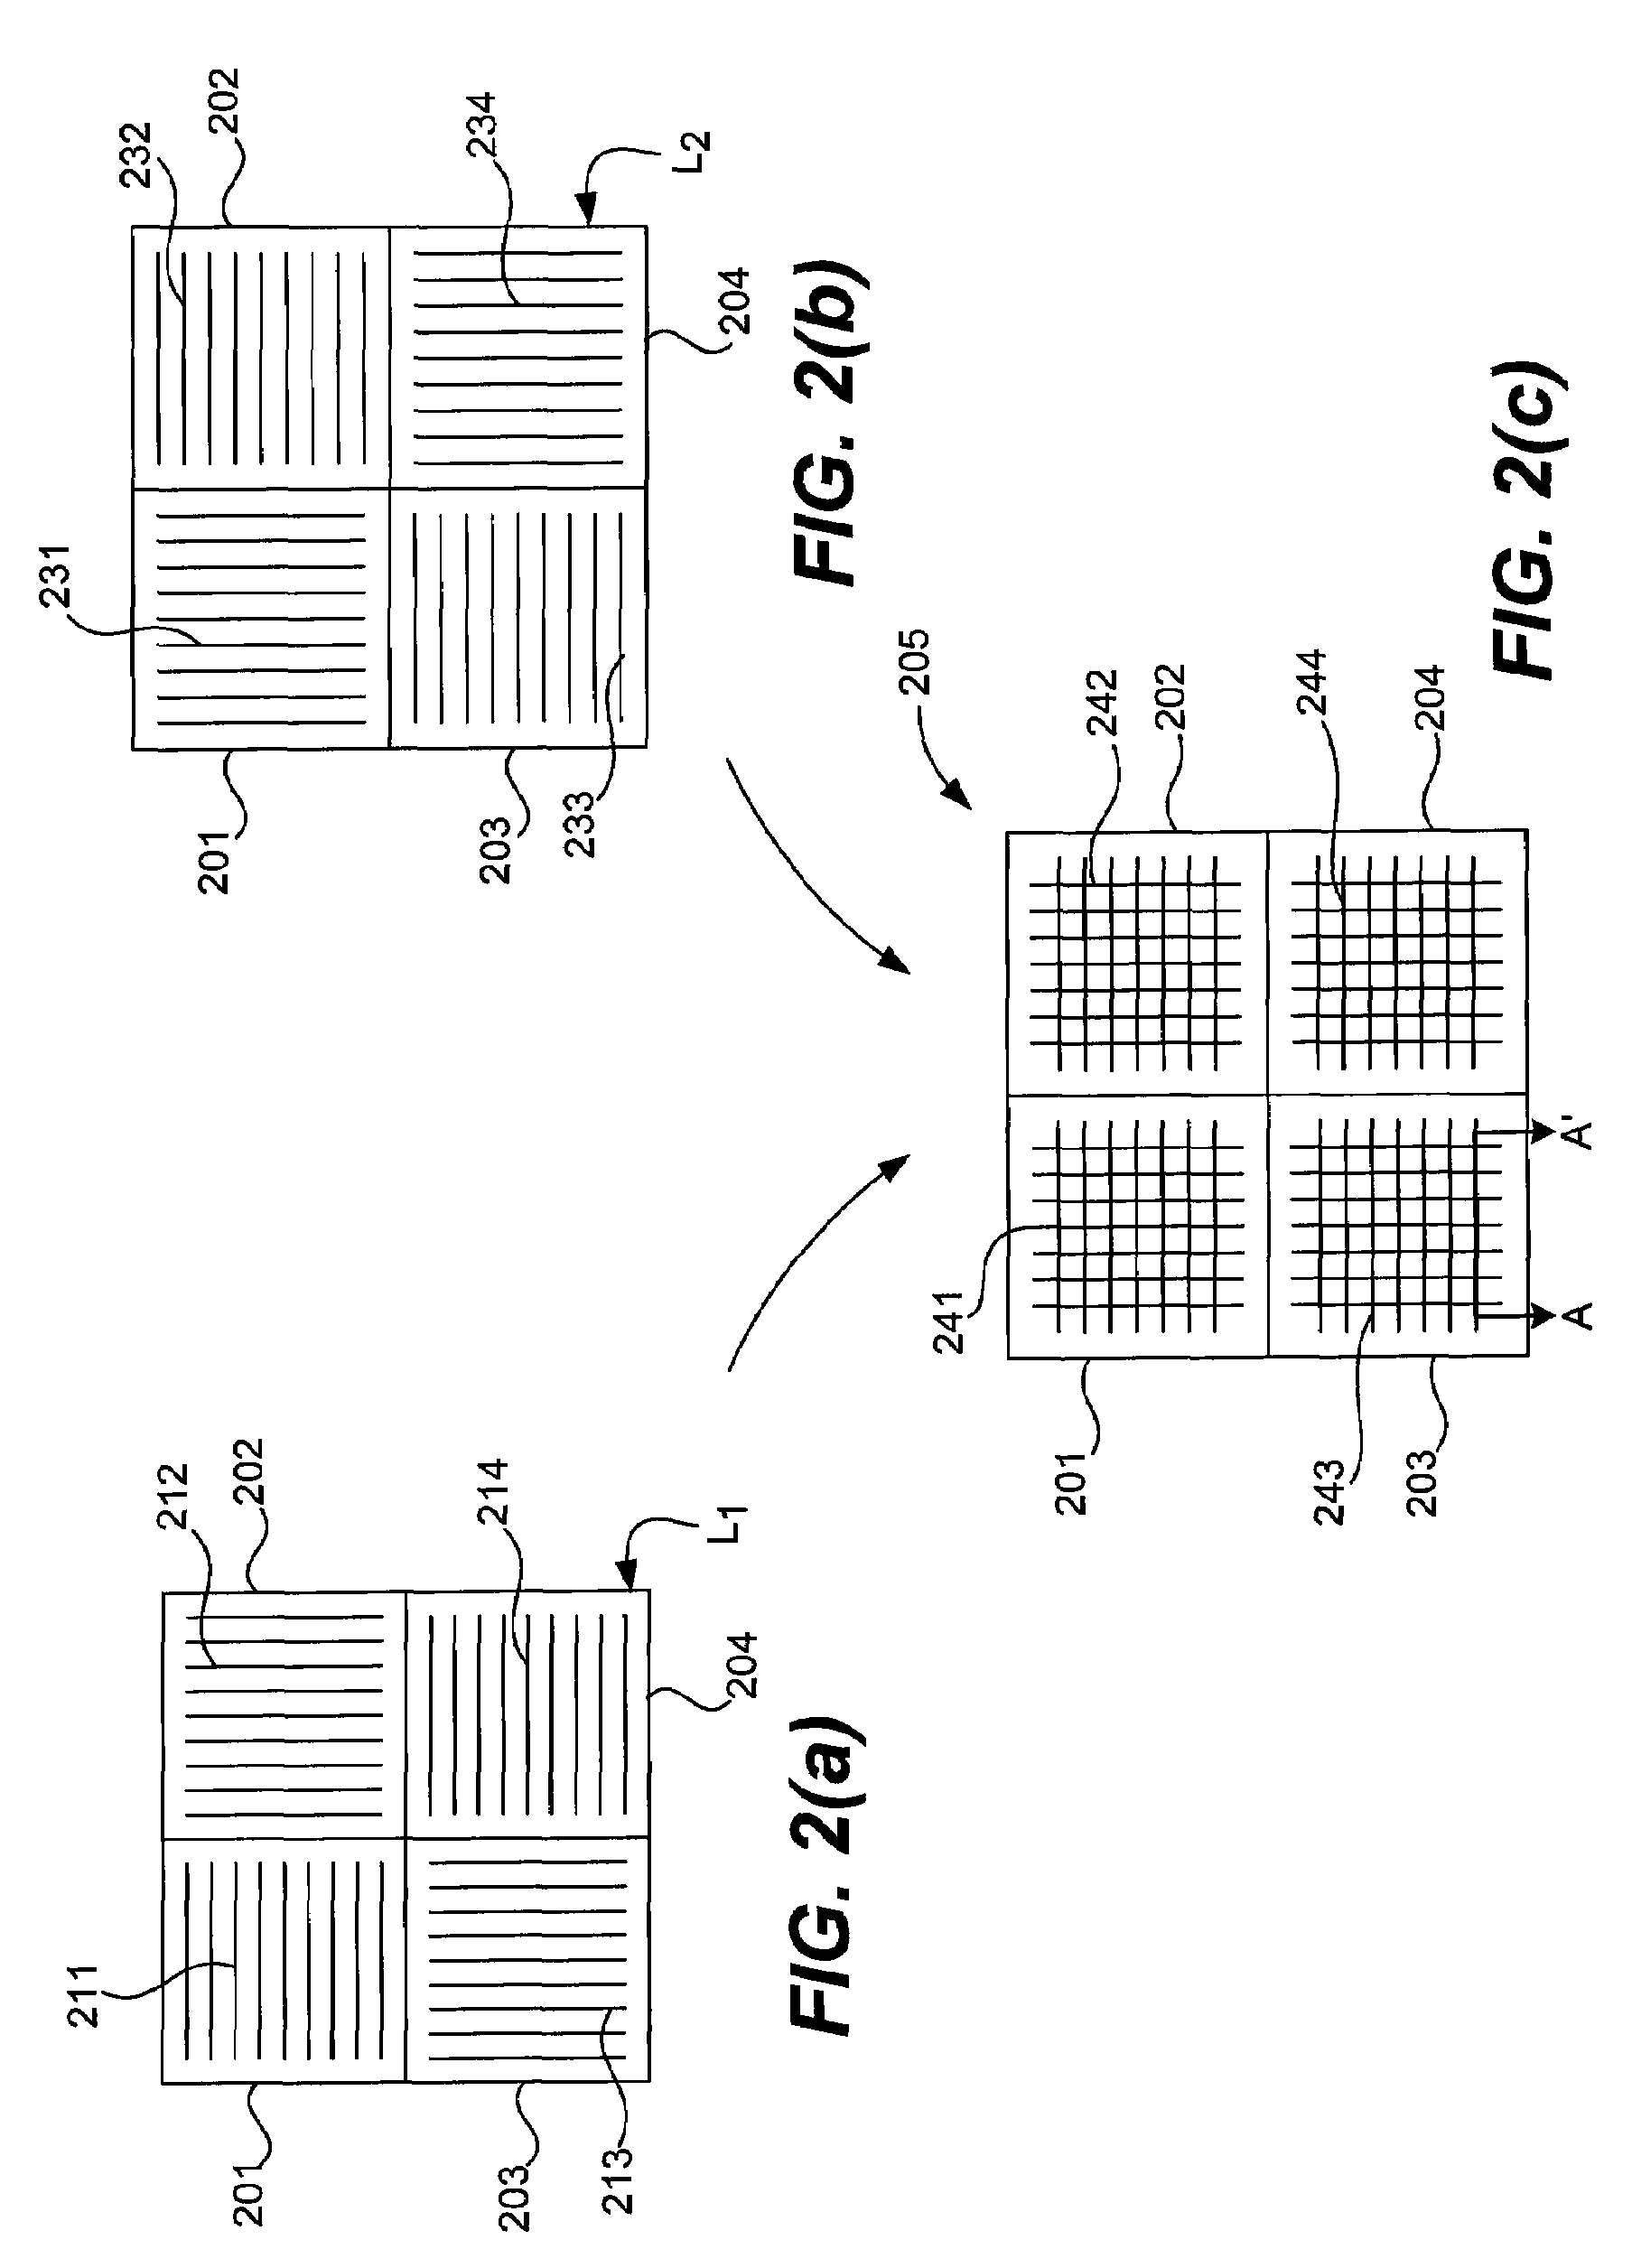 Cross hatched metrology marks and associated method of use